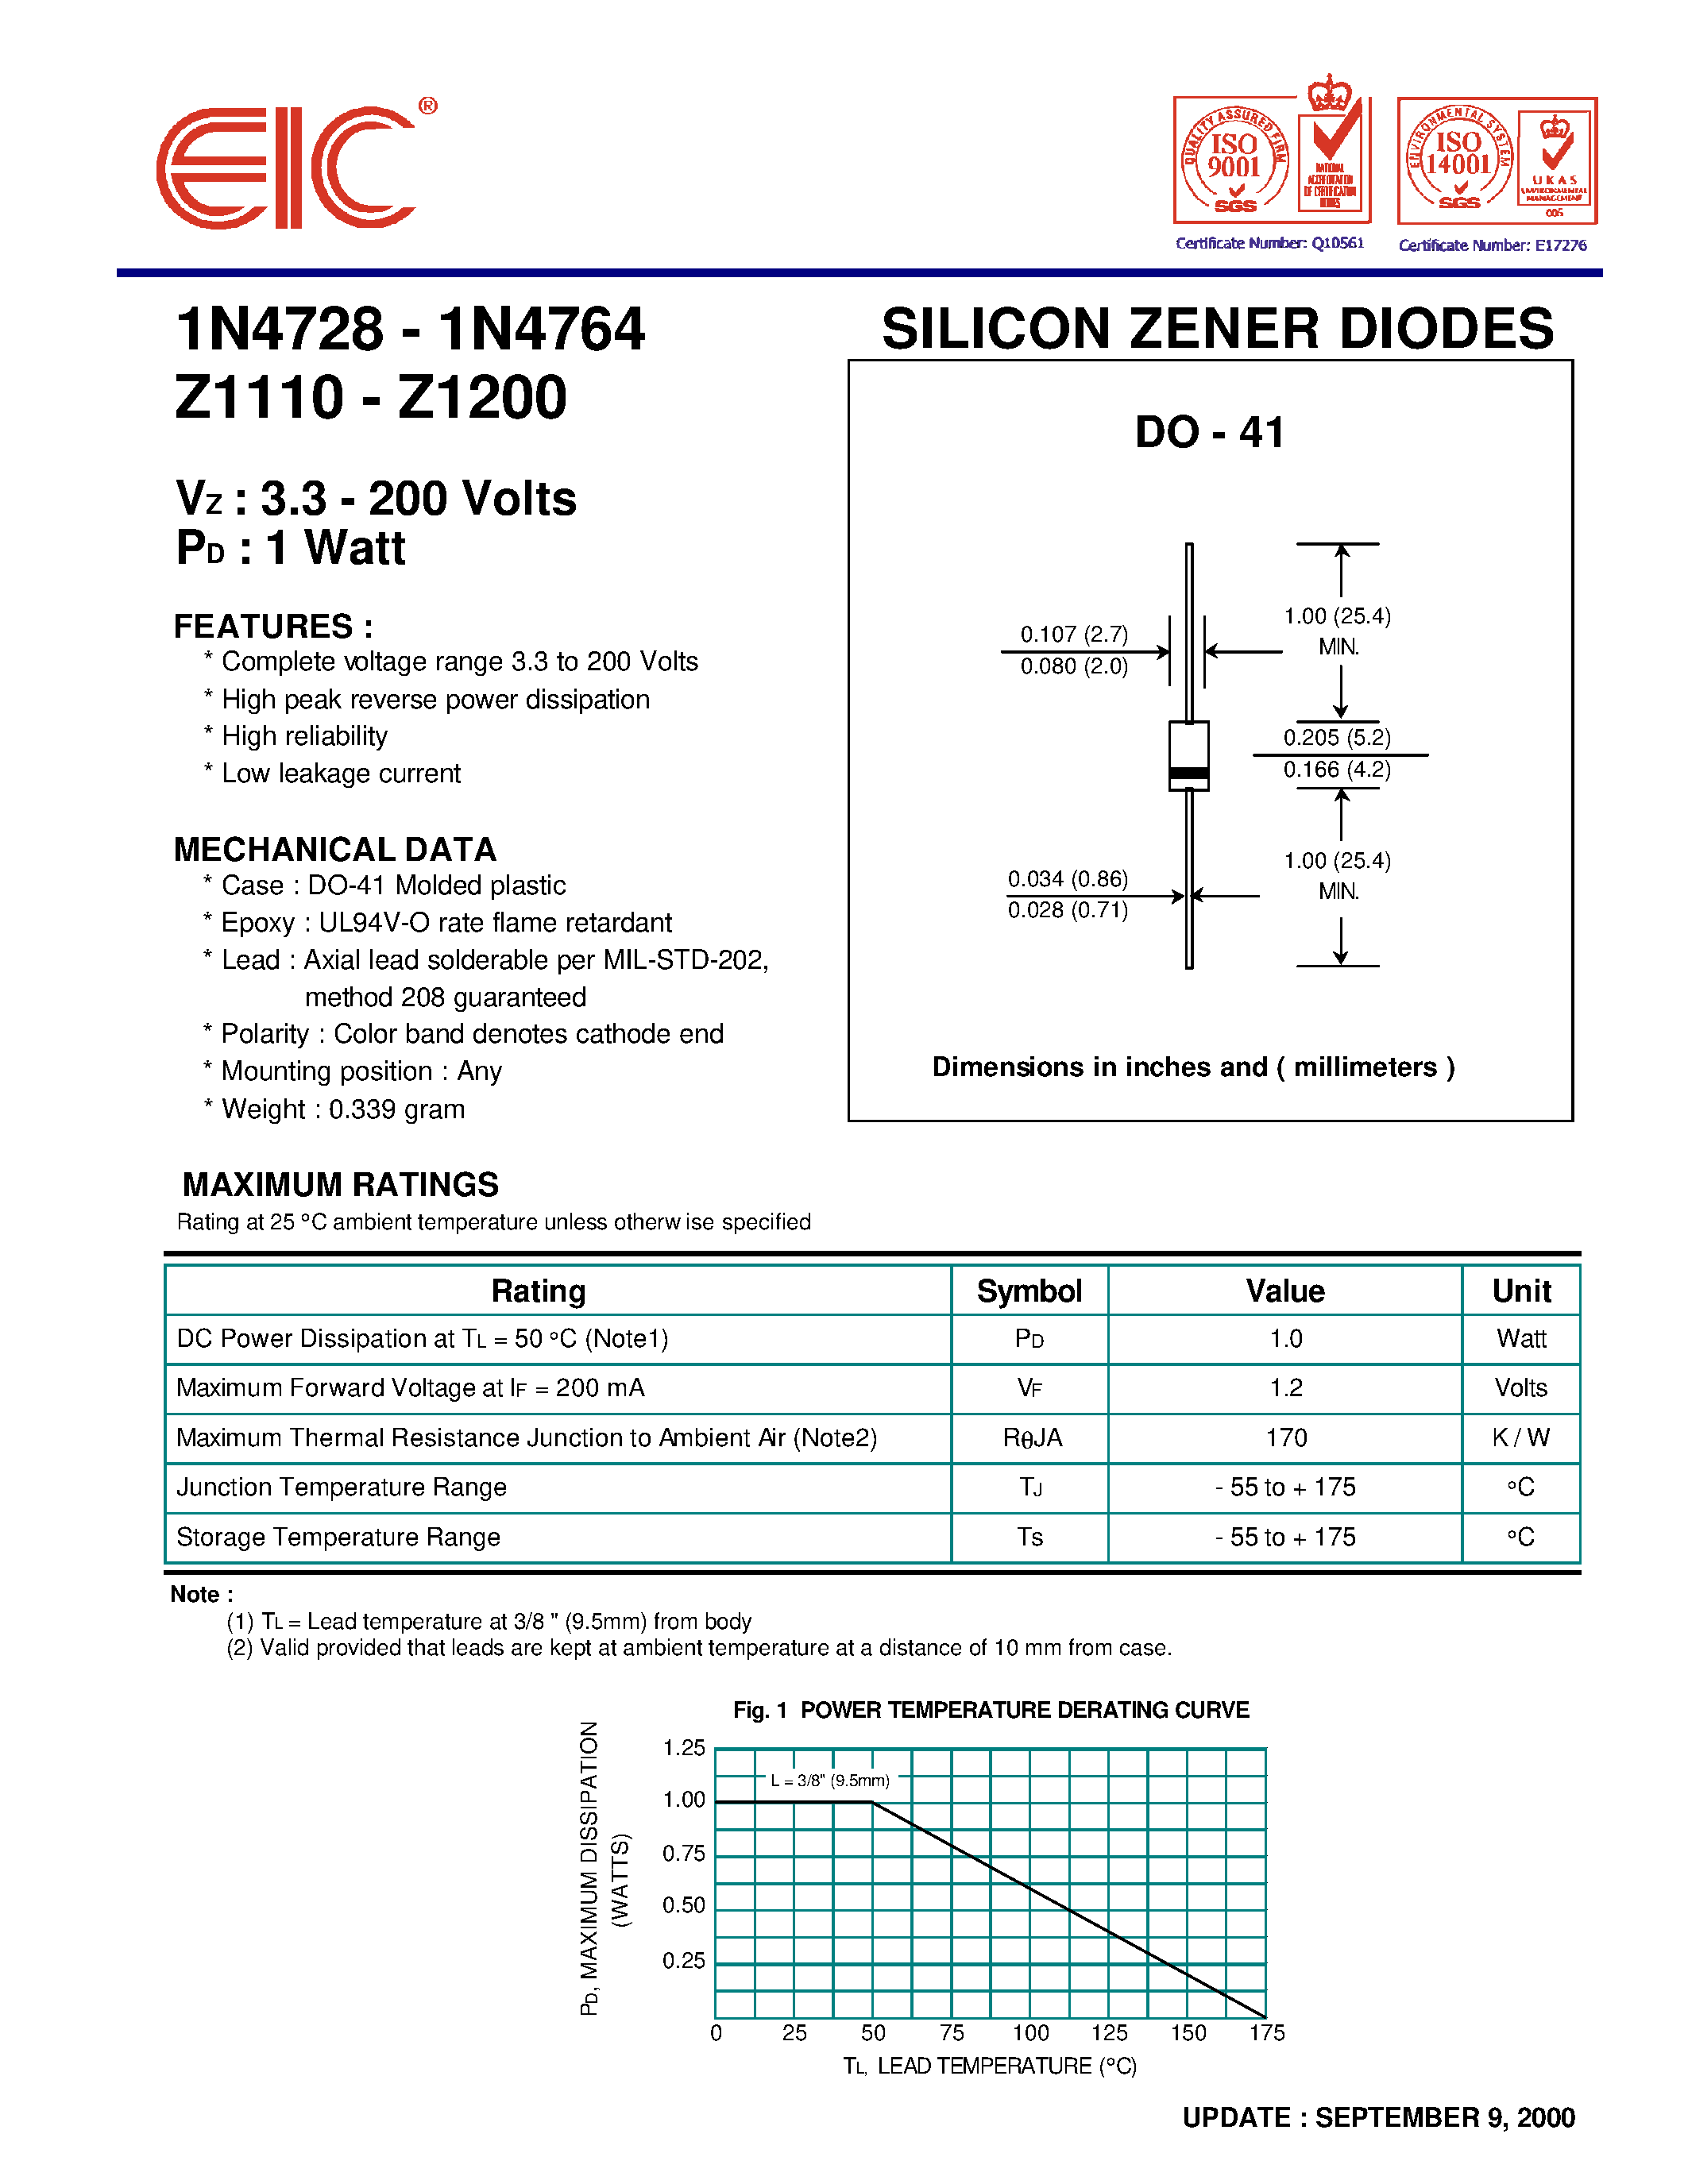 Datasheet 1N4756 - SILICON ZENER DIODES page 1